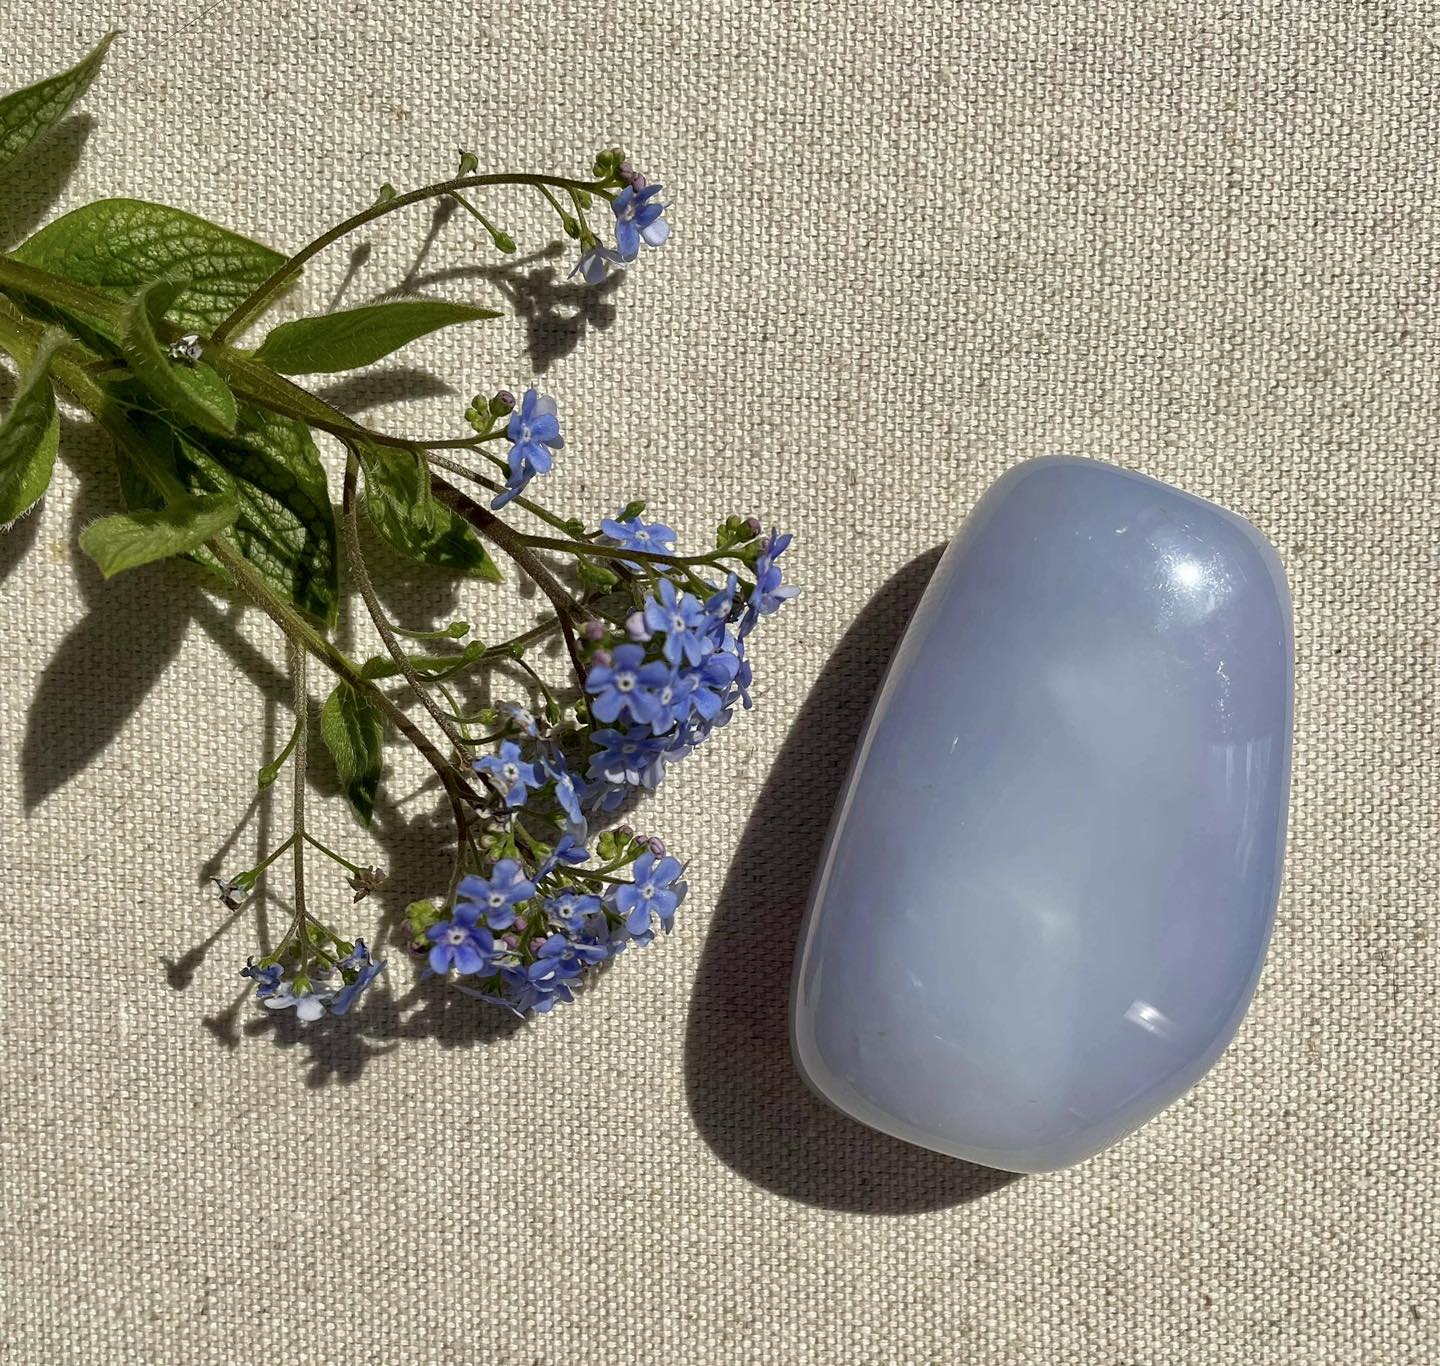 Photo of a gemstone with fresh flowers.